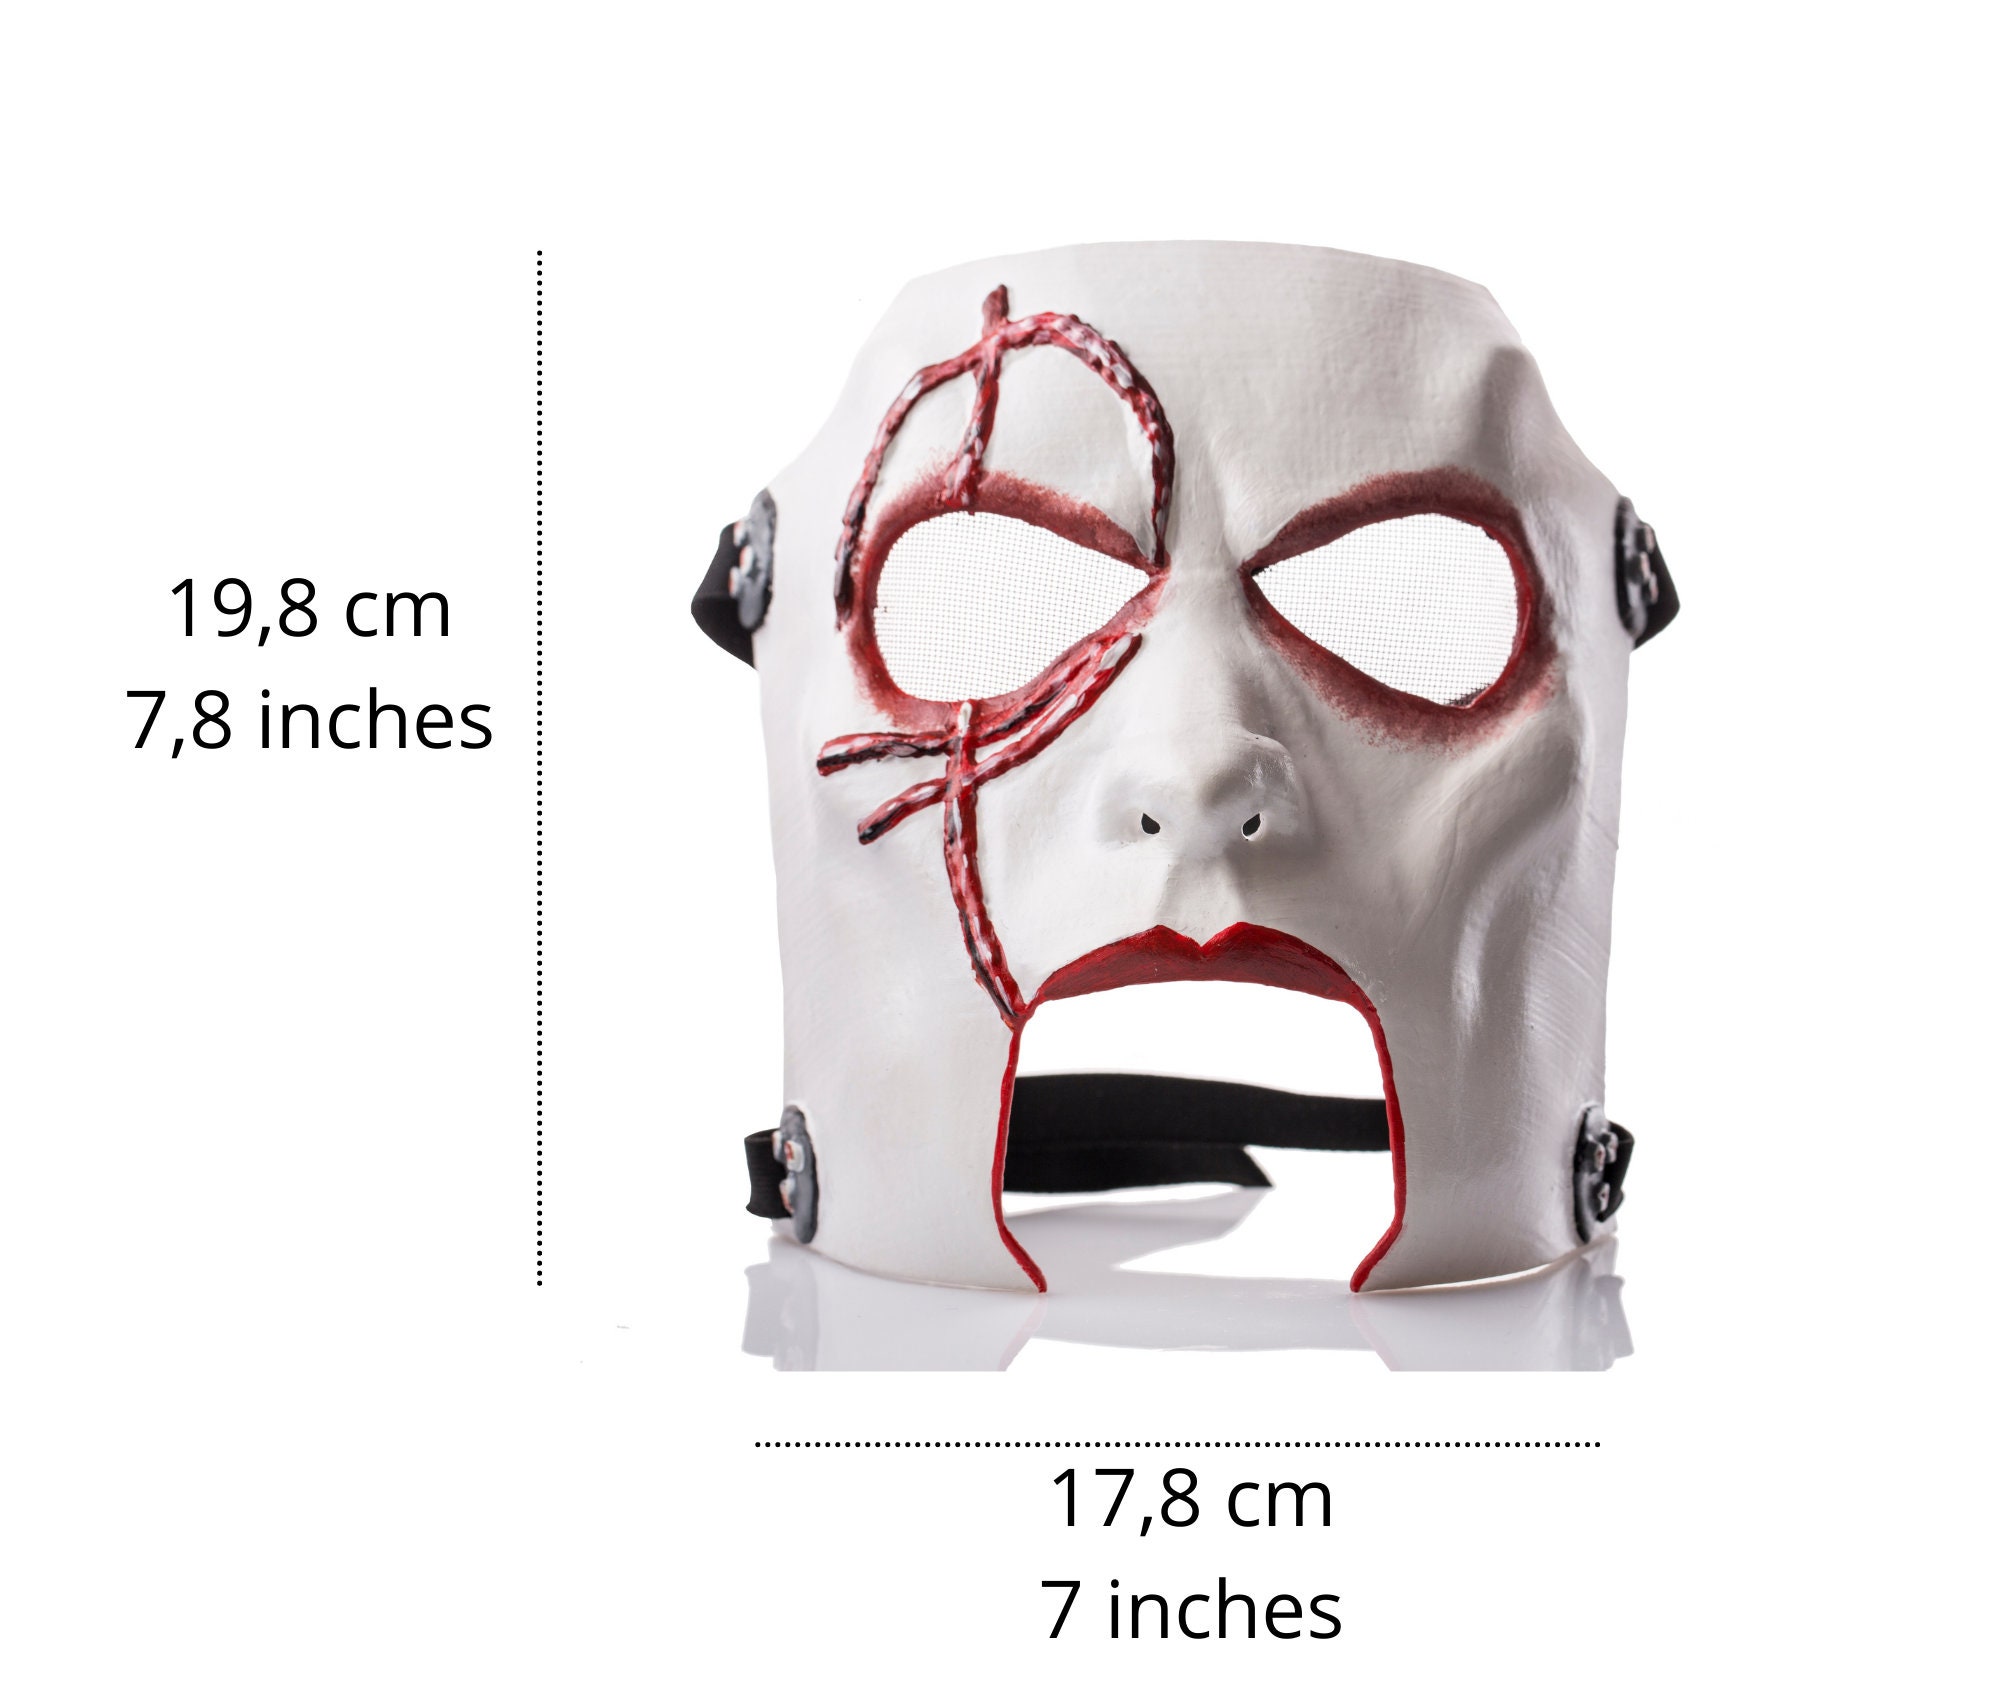 New Wave Heavy Metal Band Slipknot Zipper Mouth Same Paragraph White Mask Halloween Party Masquerade Adult Horror Full Face Resin Mask